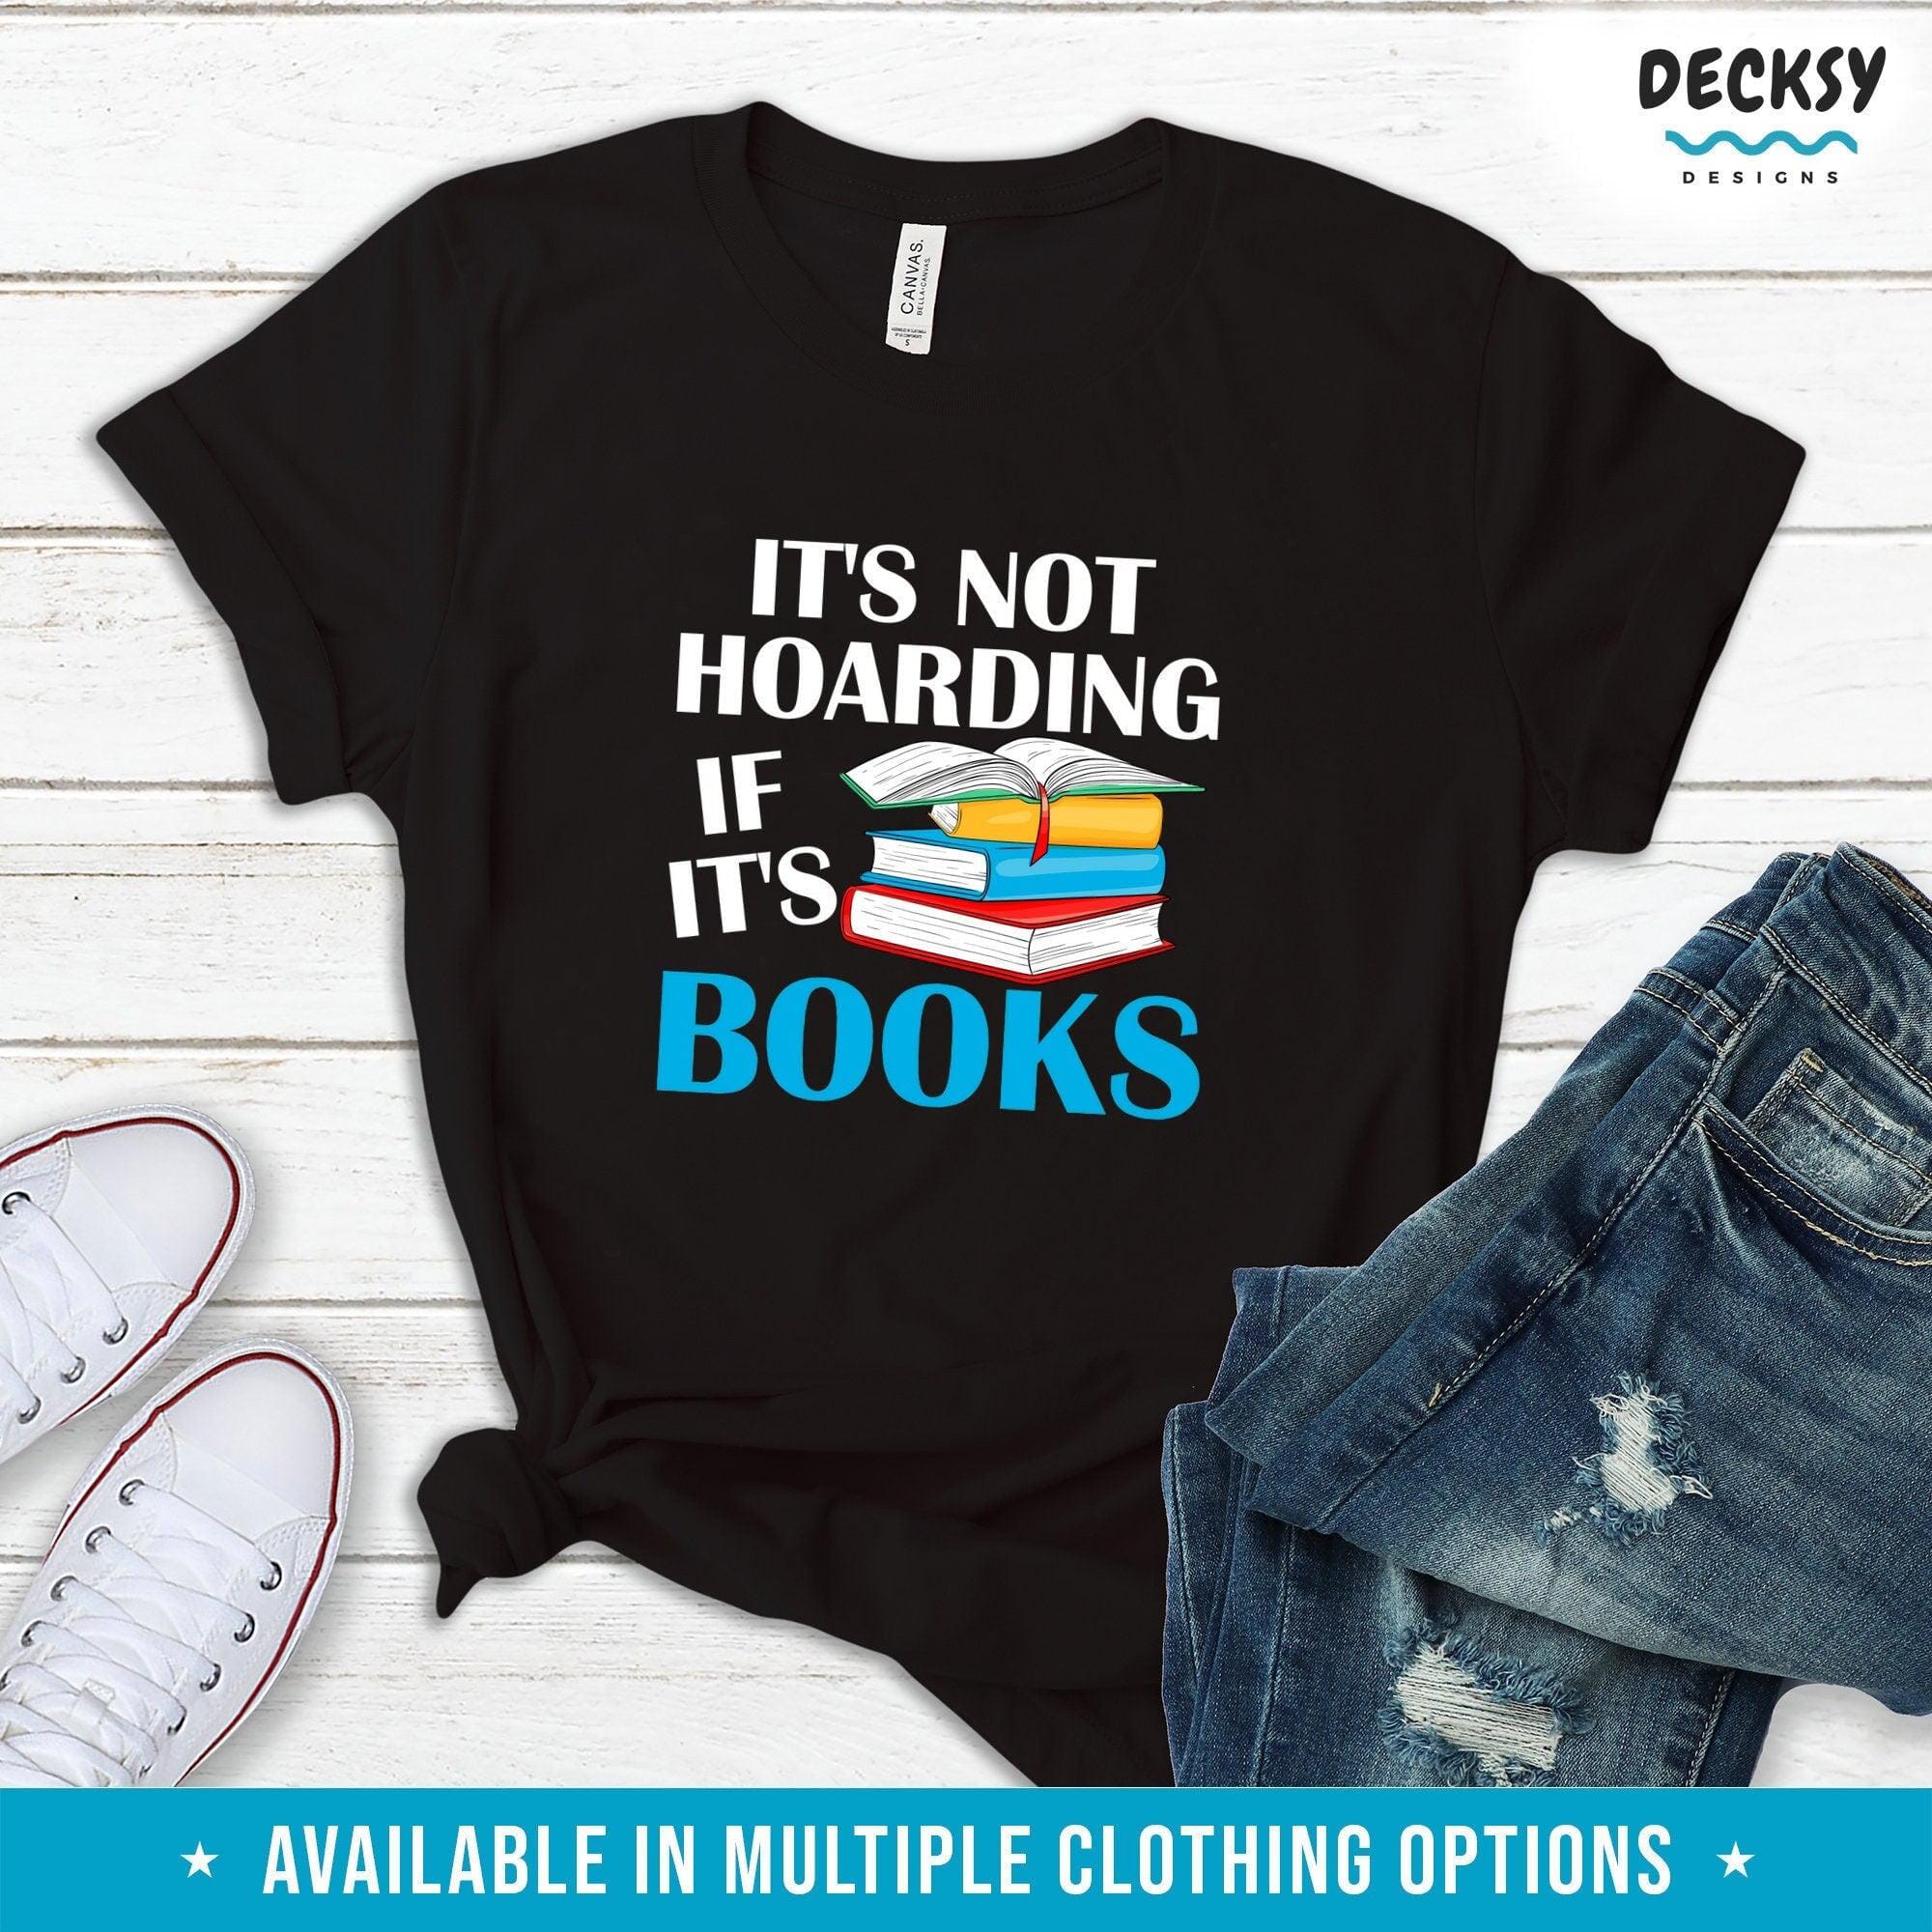 Bookish Shirt, Reader Gift-Clothing:Gender-Neutral Adult Clothing:Tops & Tees:T-shirts:Graphic Tees-DecksyDesigns